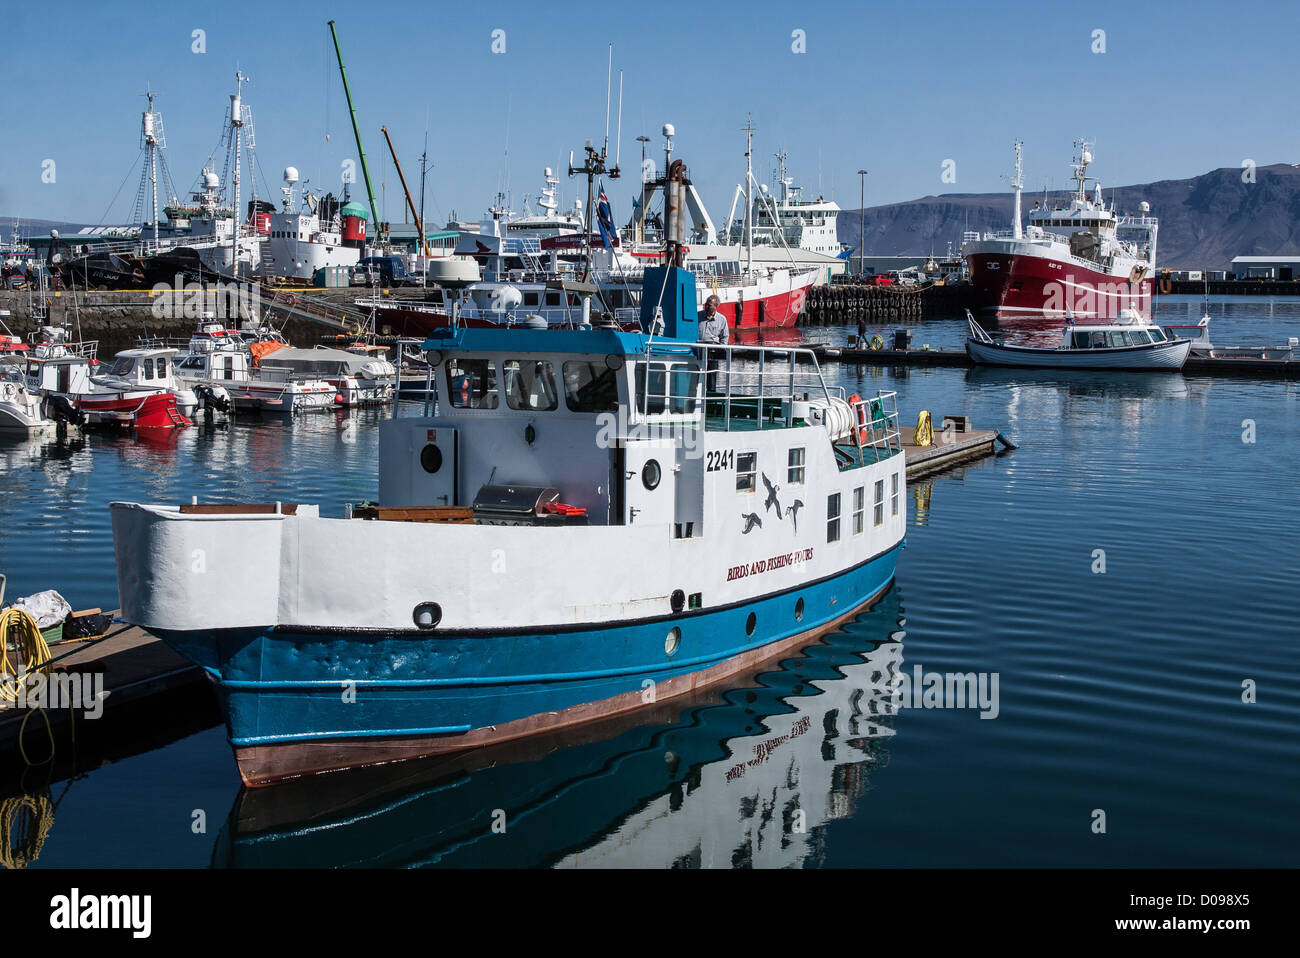 BOAT FOR EXCURSIONS AND WHALE WATCHING TRAWLERS IN THE BACKGROUND PORT OF REYKJAVIK ICELAND Stock Photo